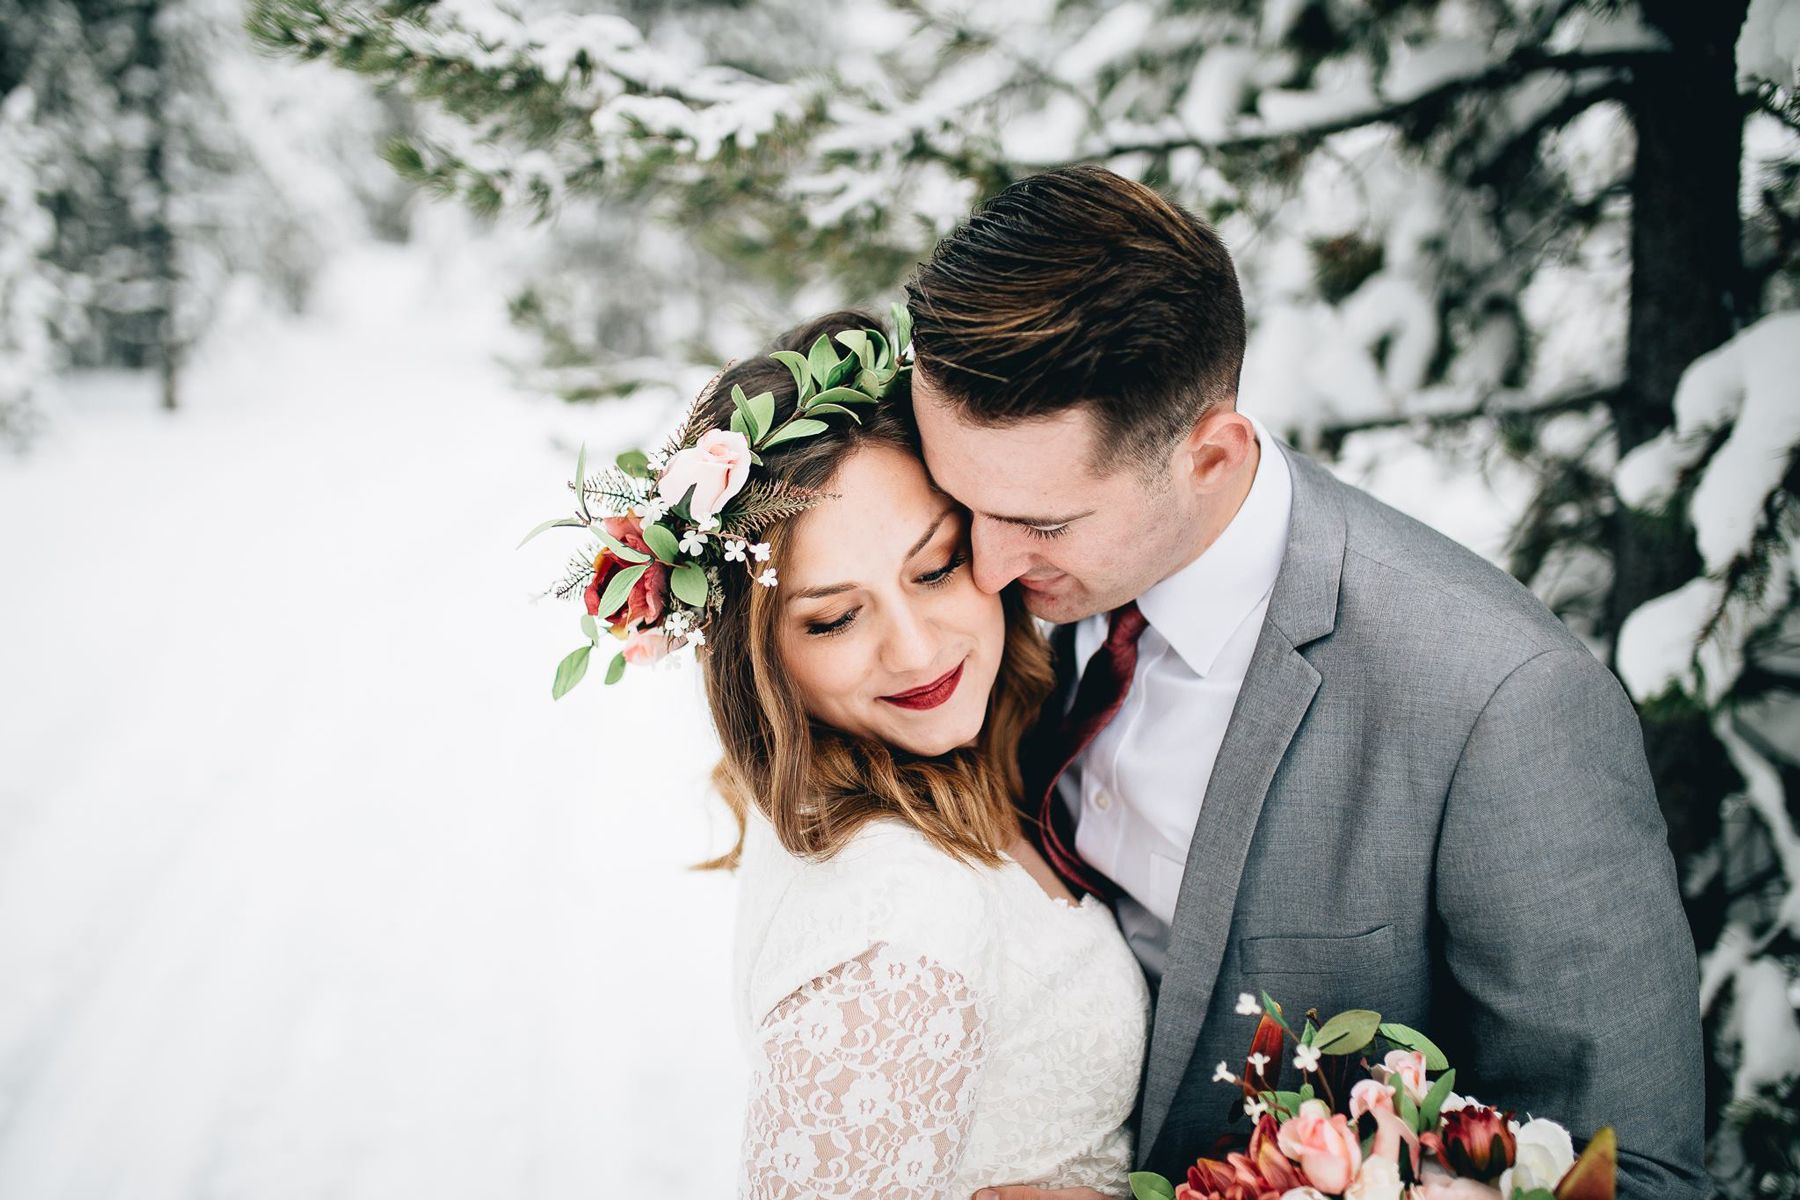 34 Snowy Wedding Photos That Will Make You Want to Get Married